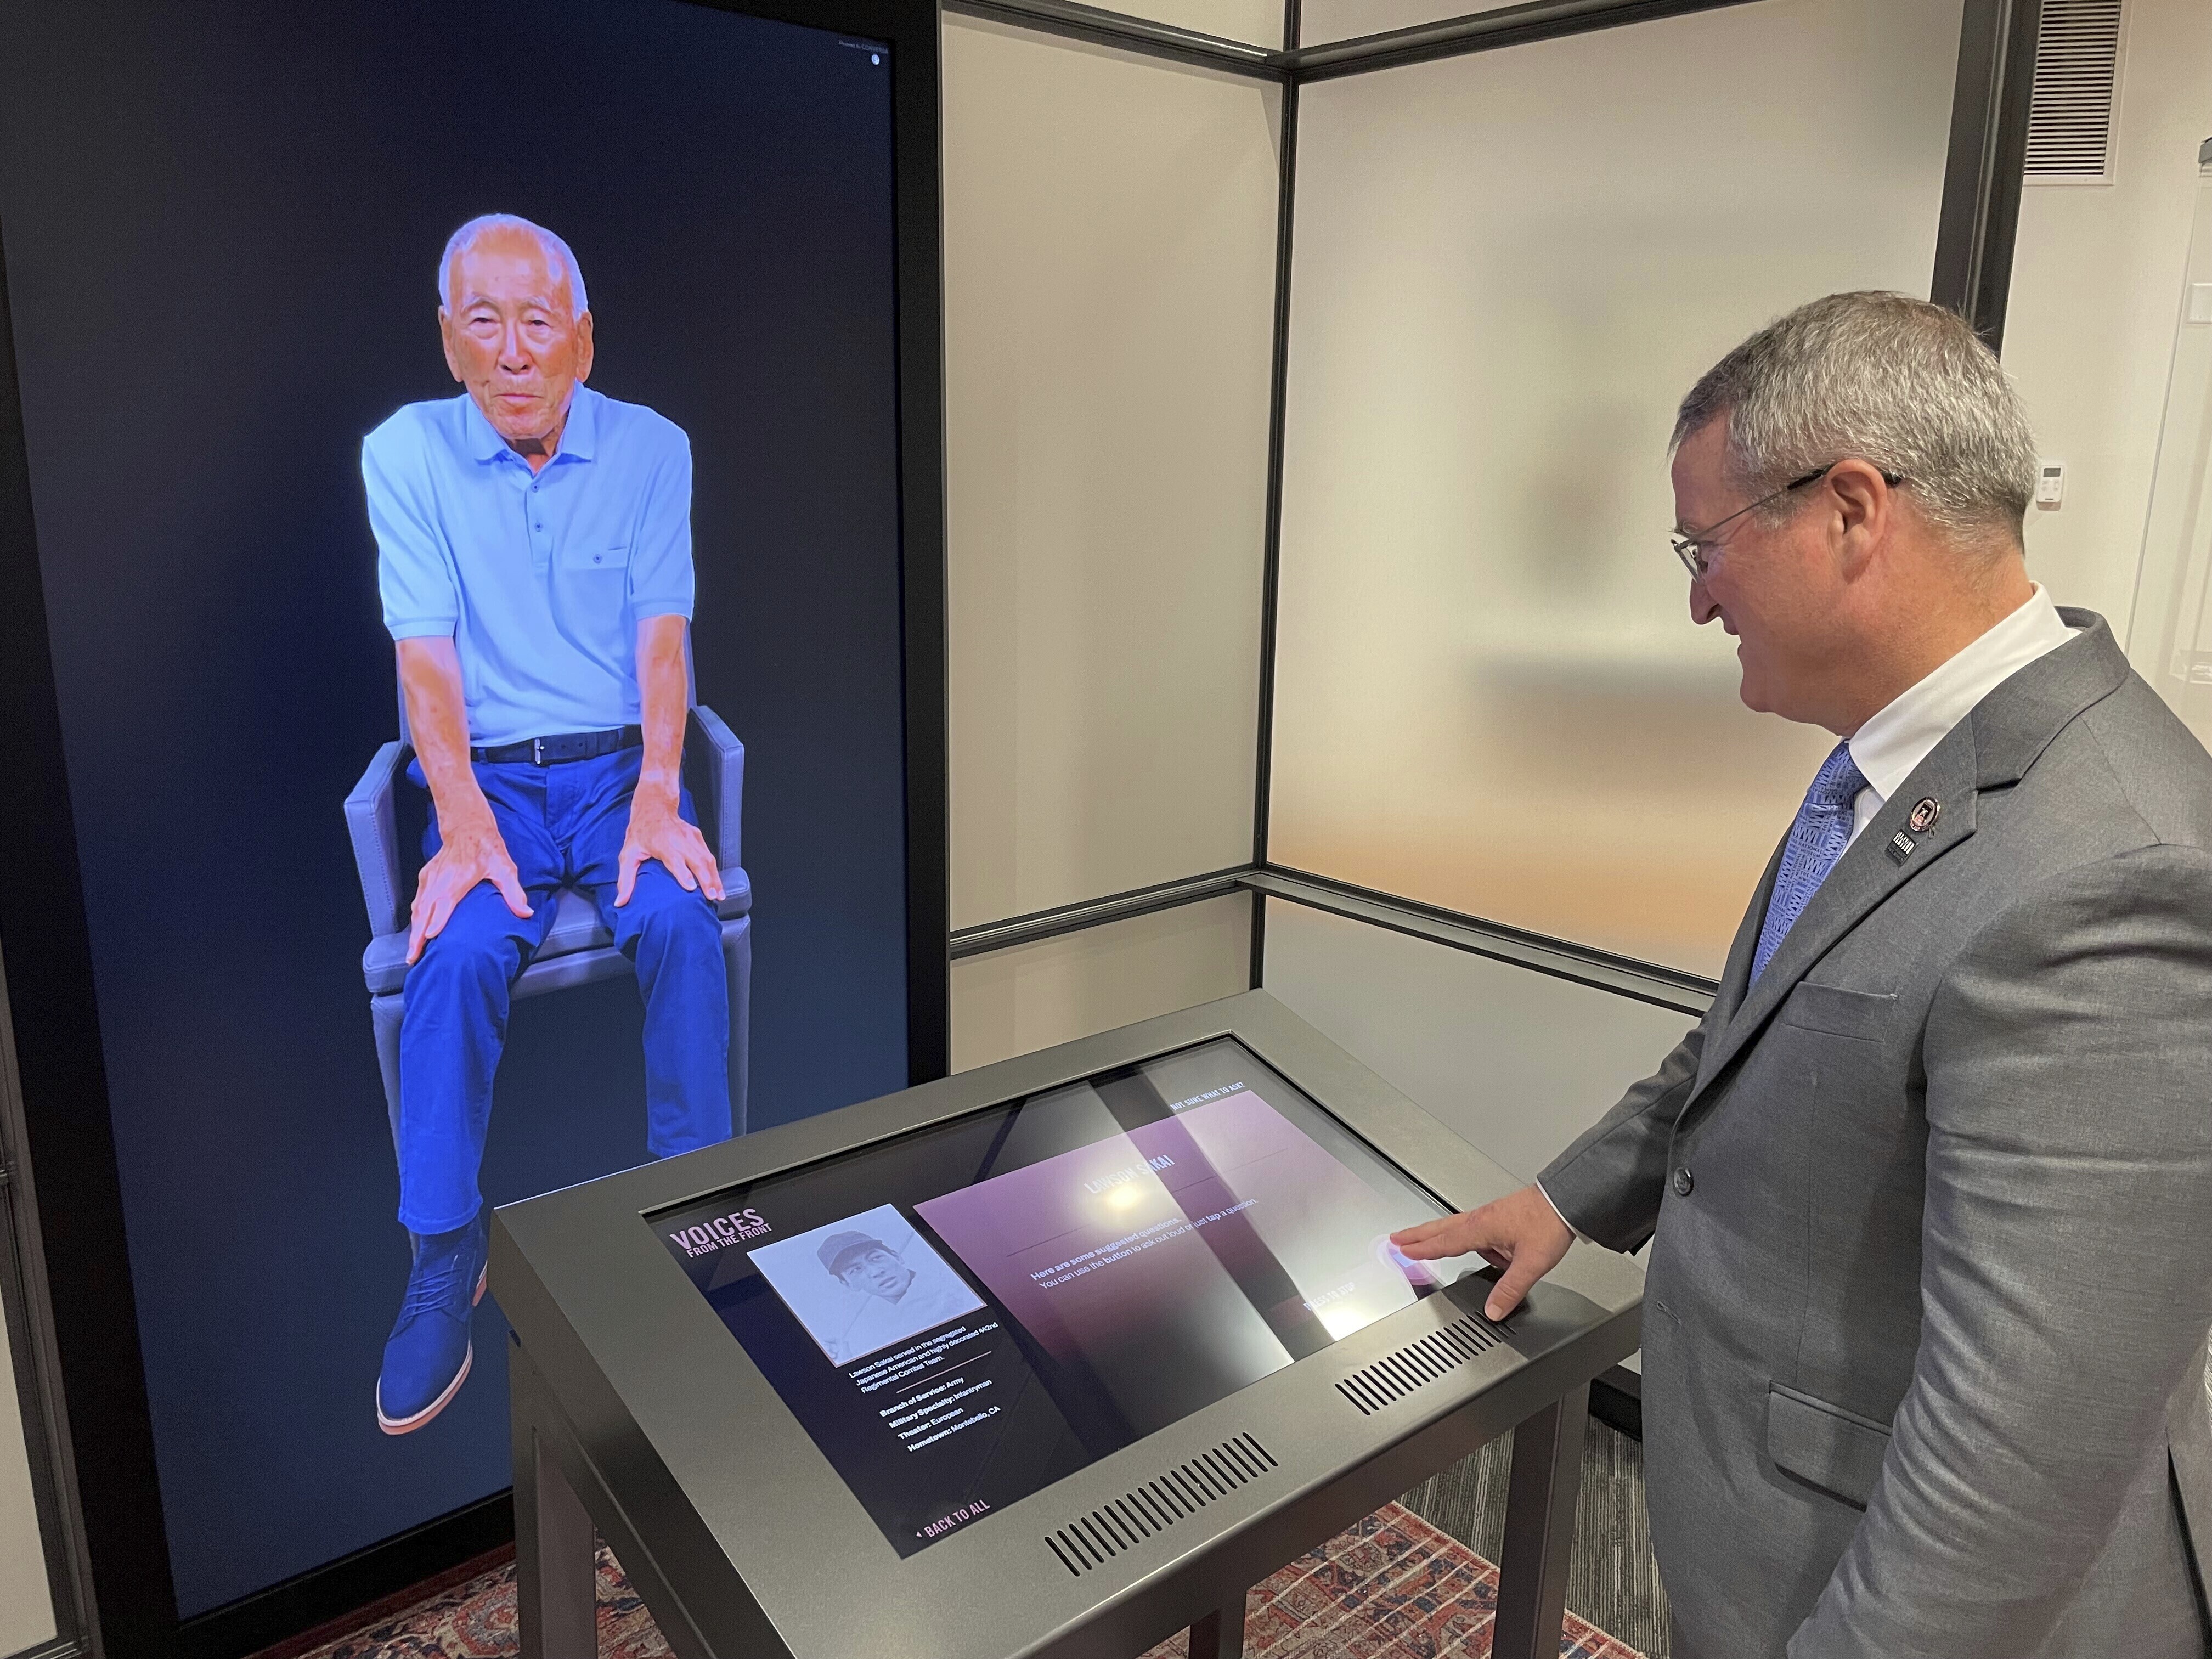 AI-aided virtual conversations with WWII vets are latest feature at
New Orleans museum